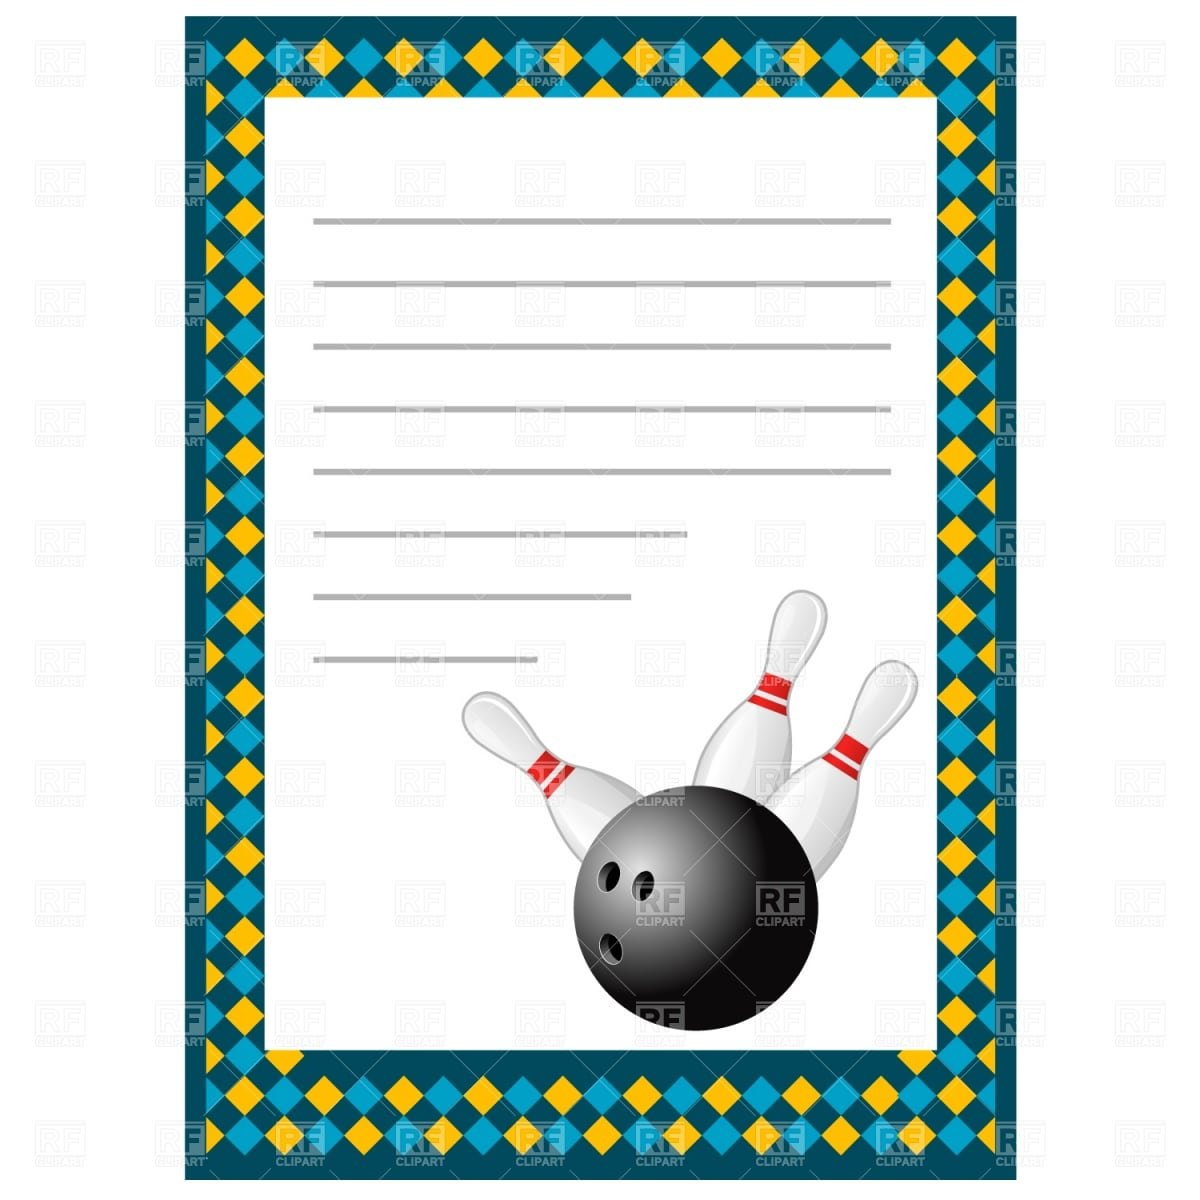 Bowling Birthday Party Invitation Template